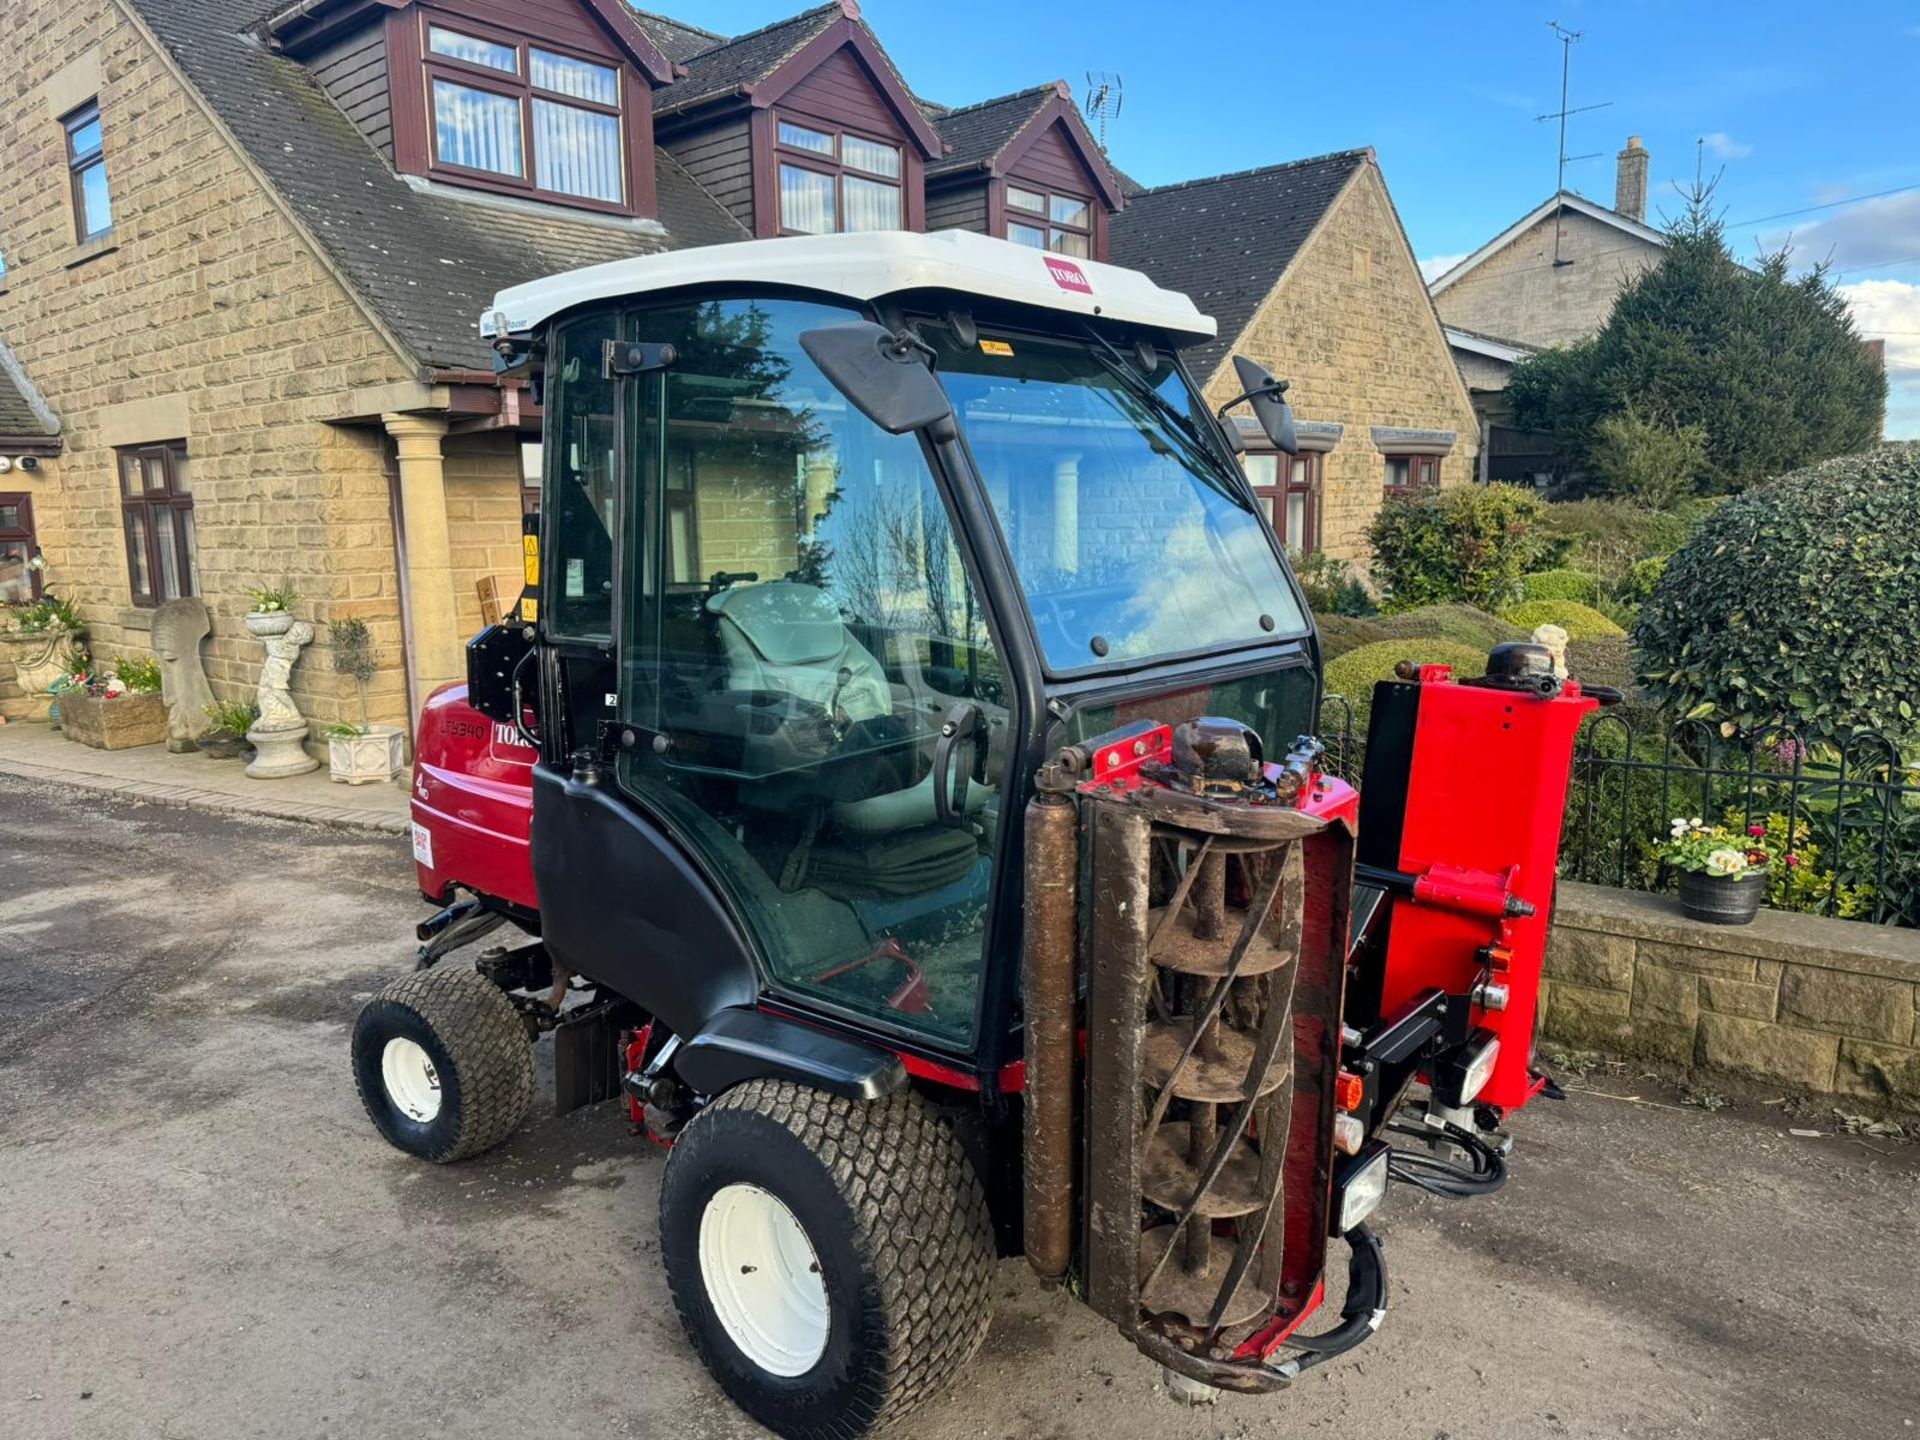 2016 TORO LT3340 4WD 3 GANG RIDE ON CYLINDER MOWER WITH CAB AND AIR CON *PLUS VAT* - Image 5 of 18